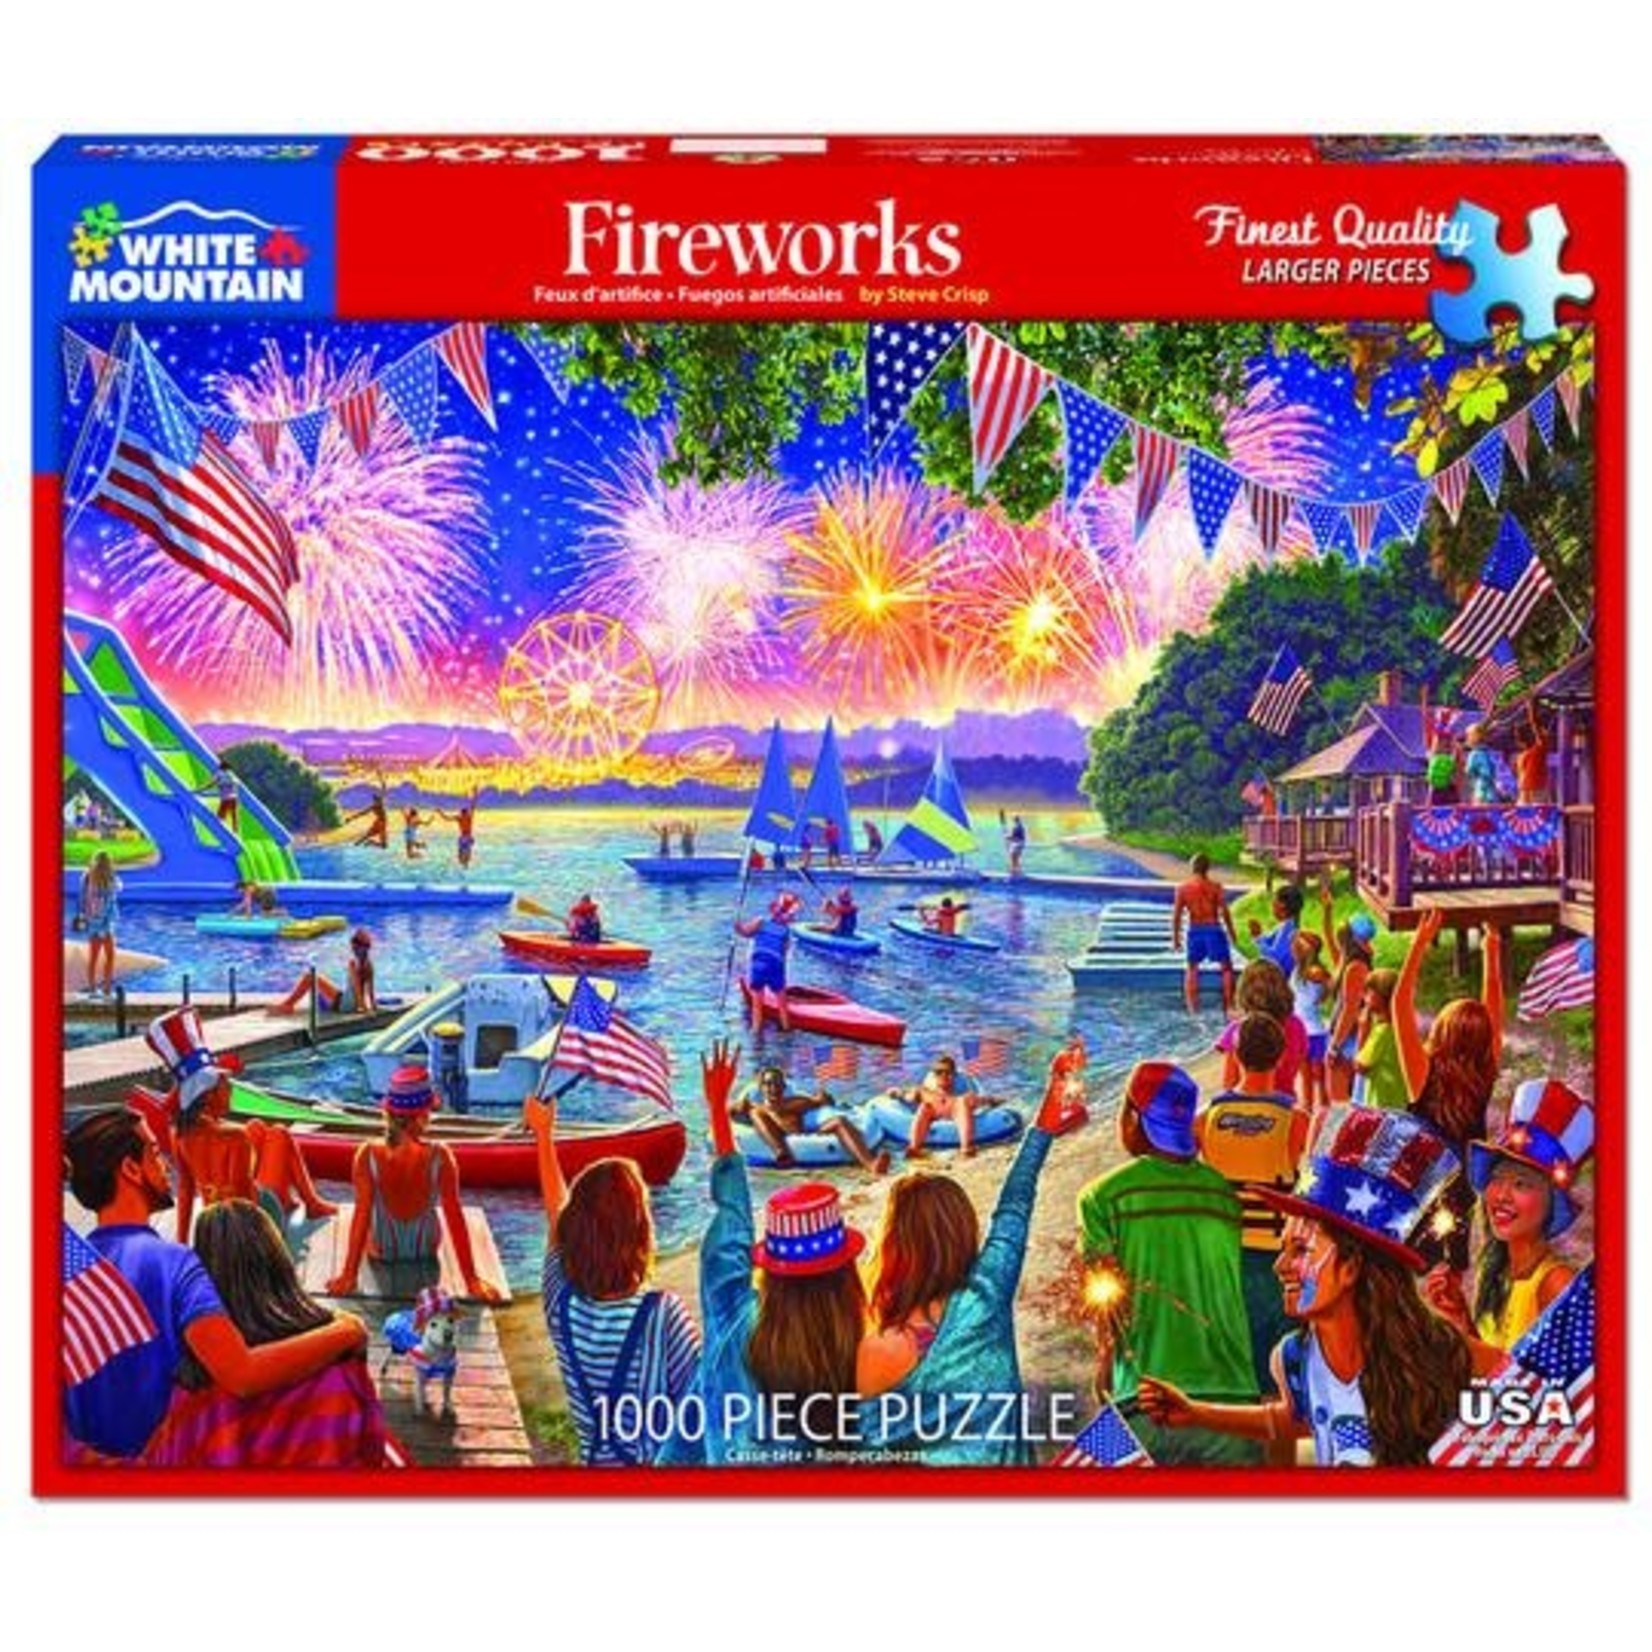 FIREWORKS PUZZLE